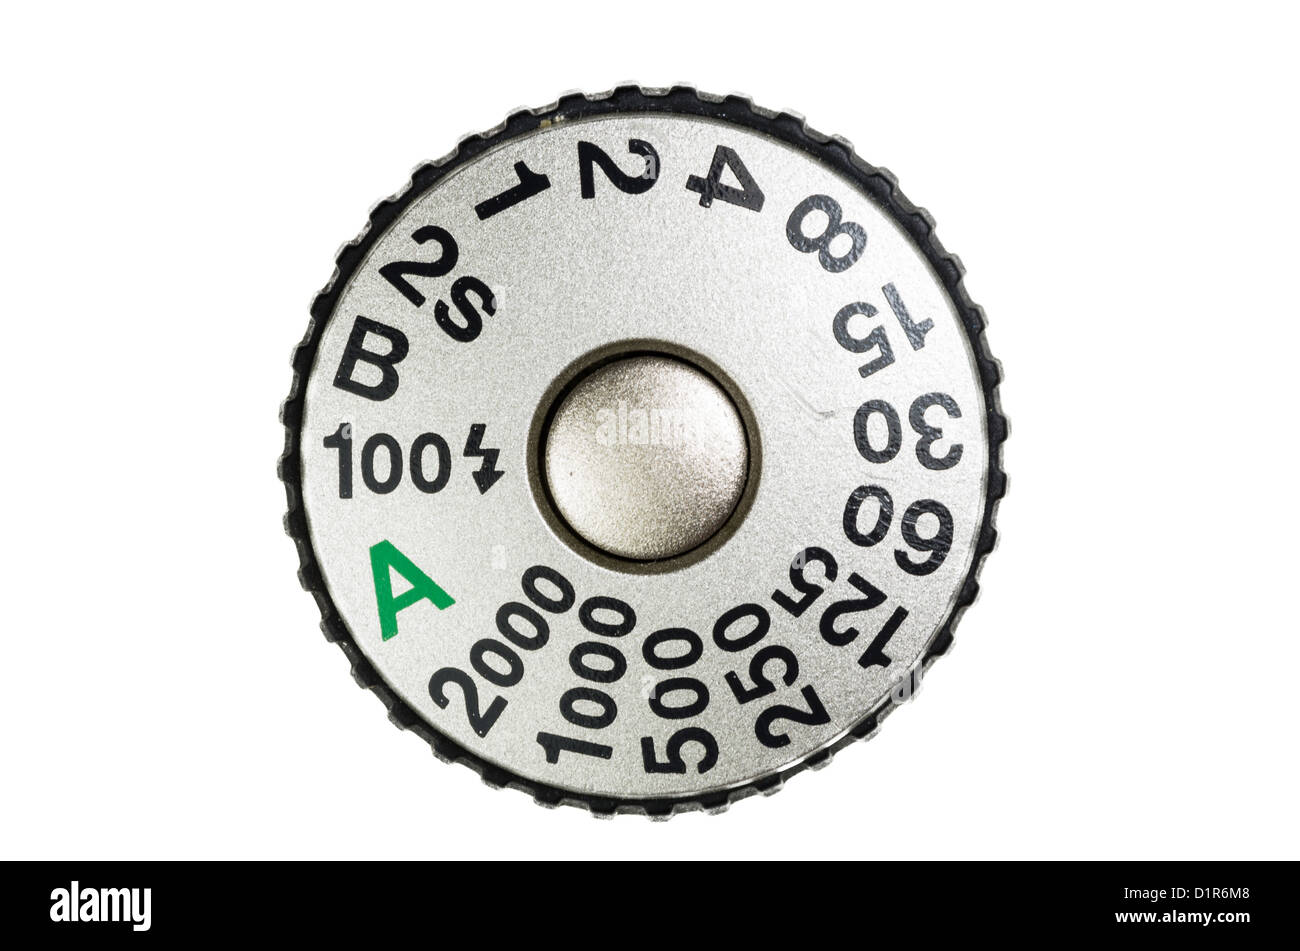 Camera shutter release button with speed selection dial Stock Photo